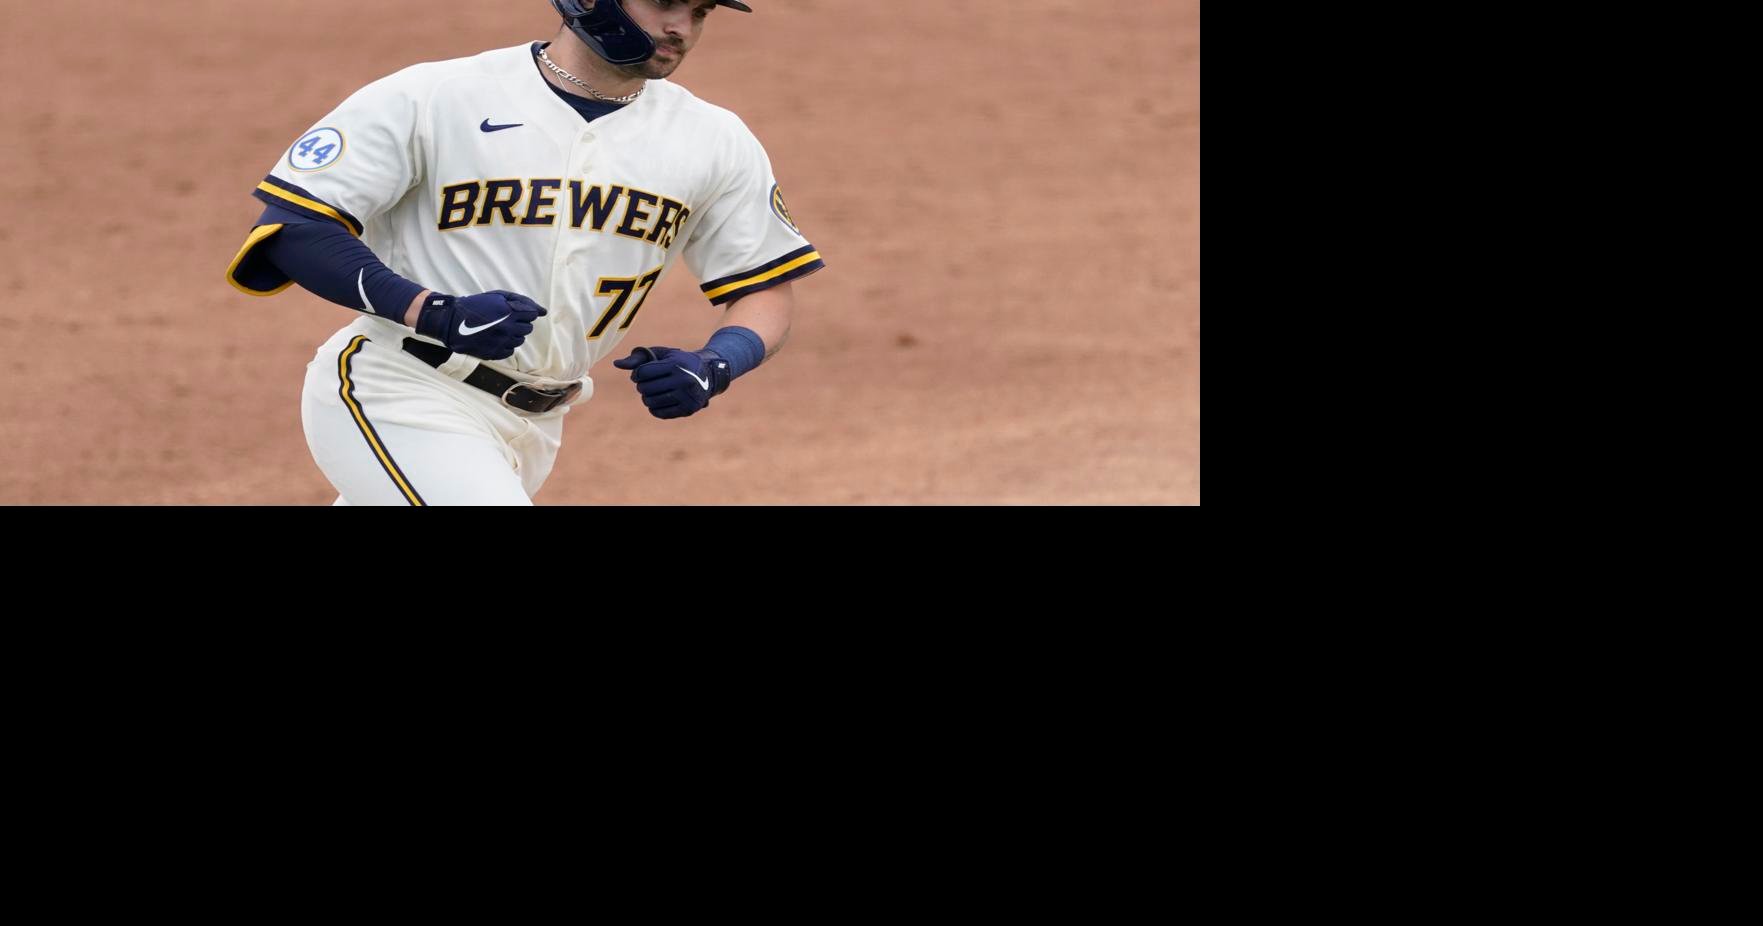 BREAKING NEWS: Craig Counsell Named Nineteenth Manager in Brewers History, by The Brewer Nation, BrewerNation